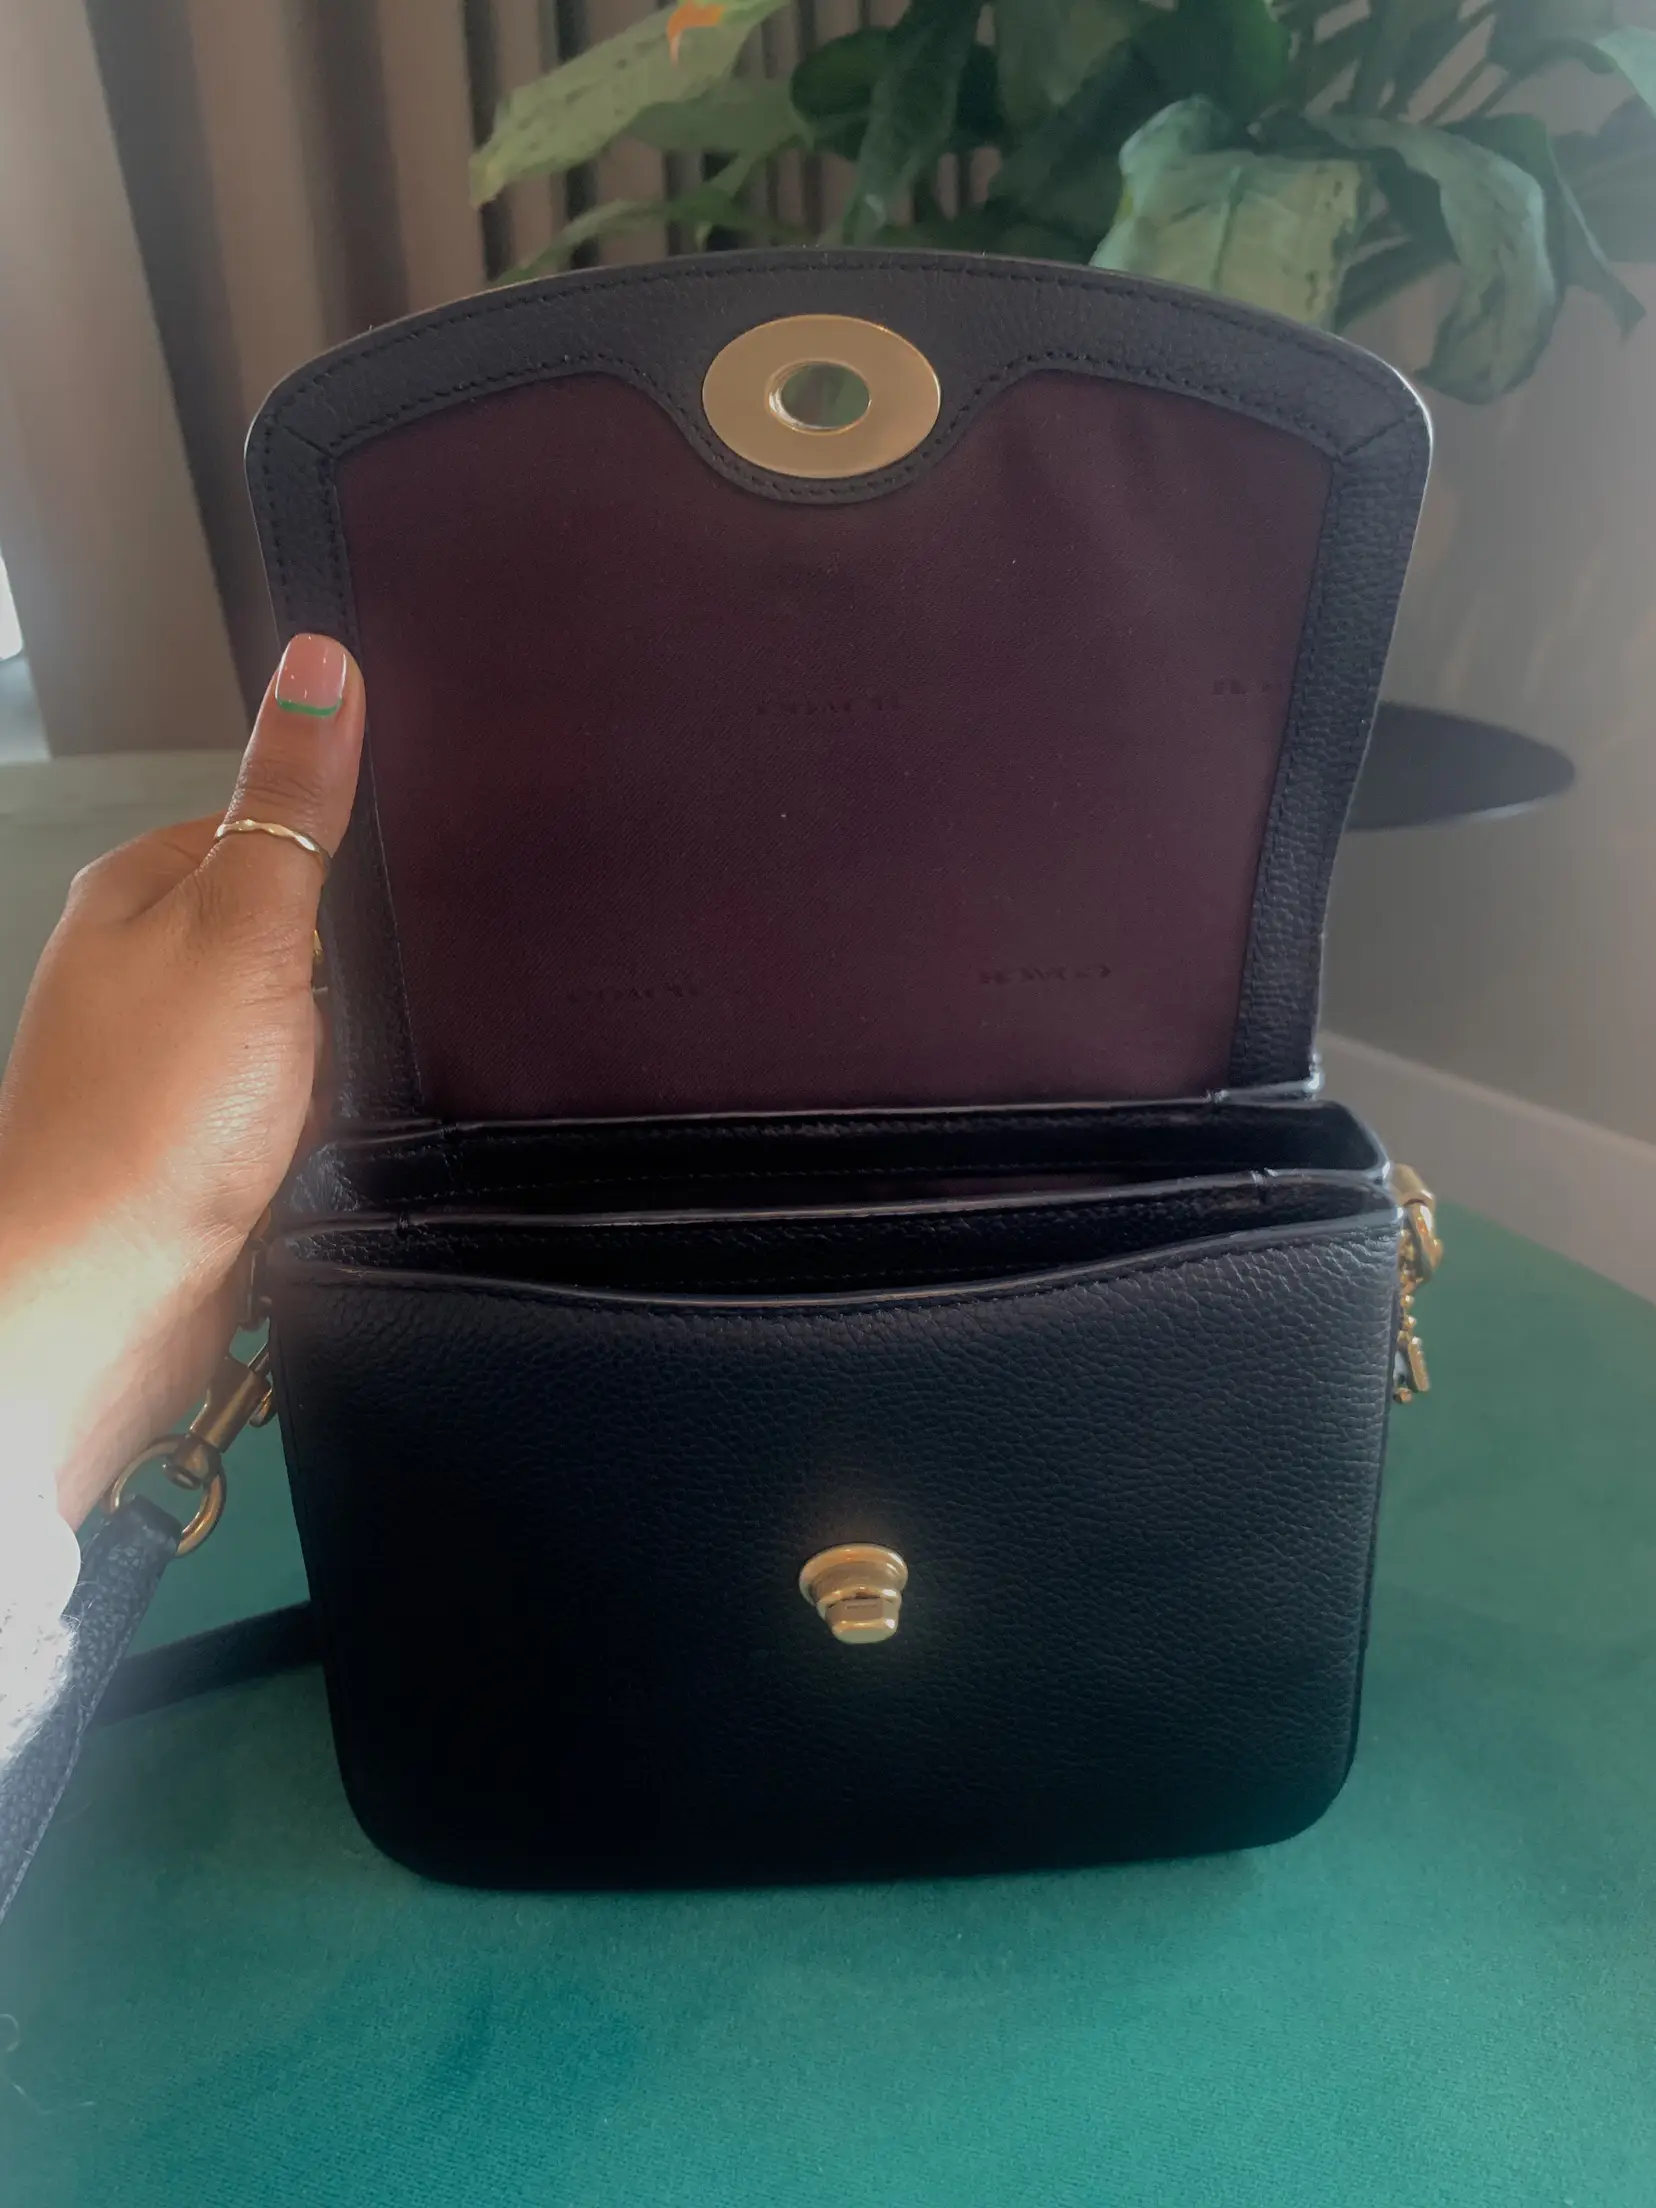 COACH CASSIE 19, review + what's in my bag